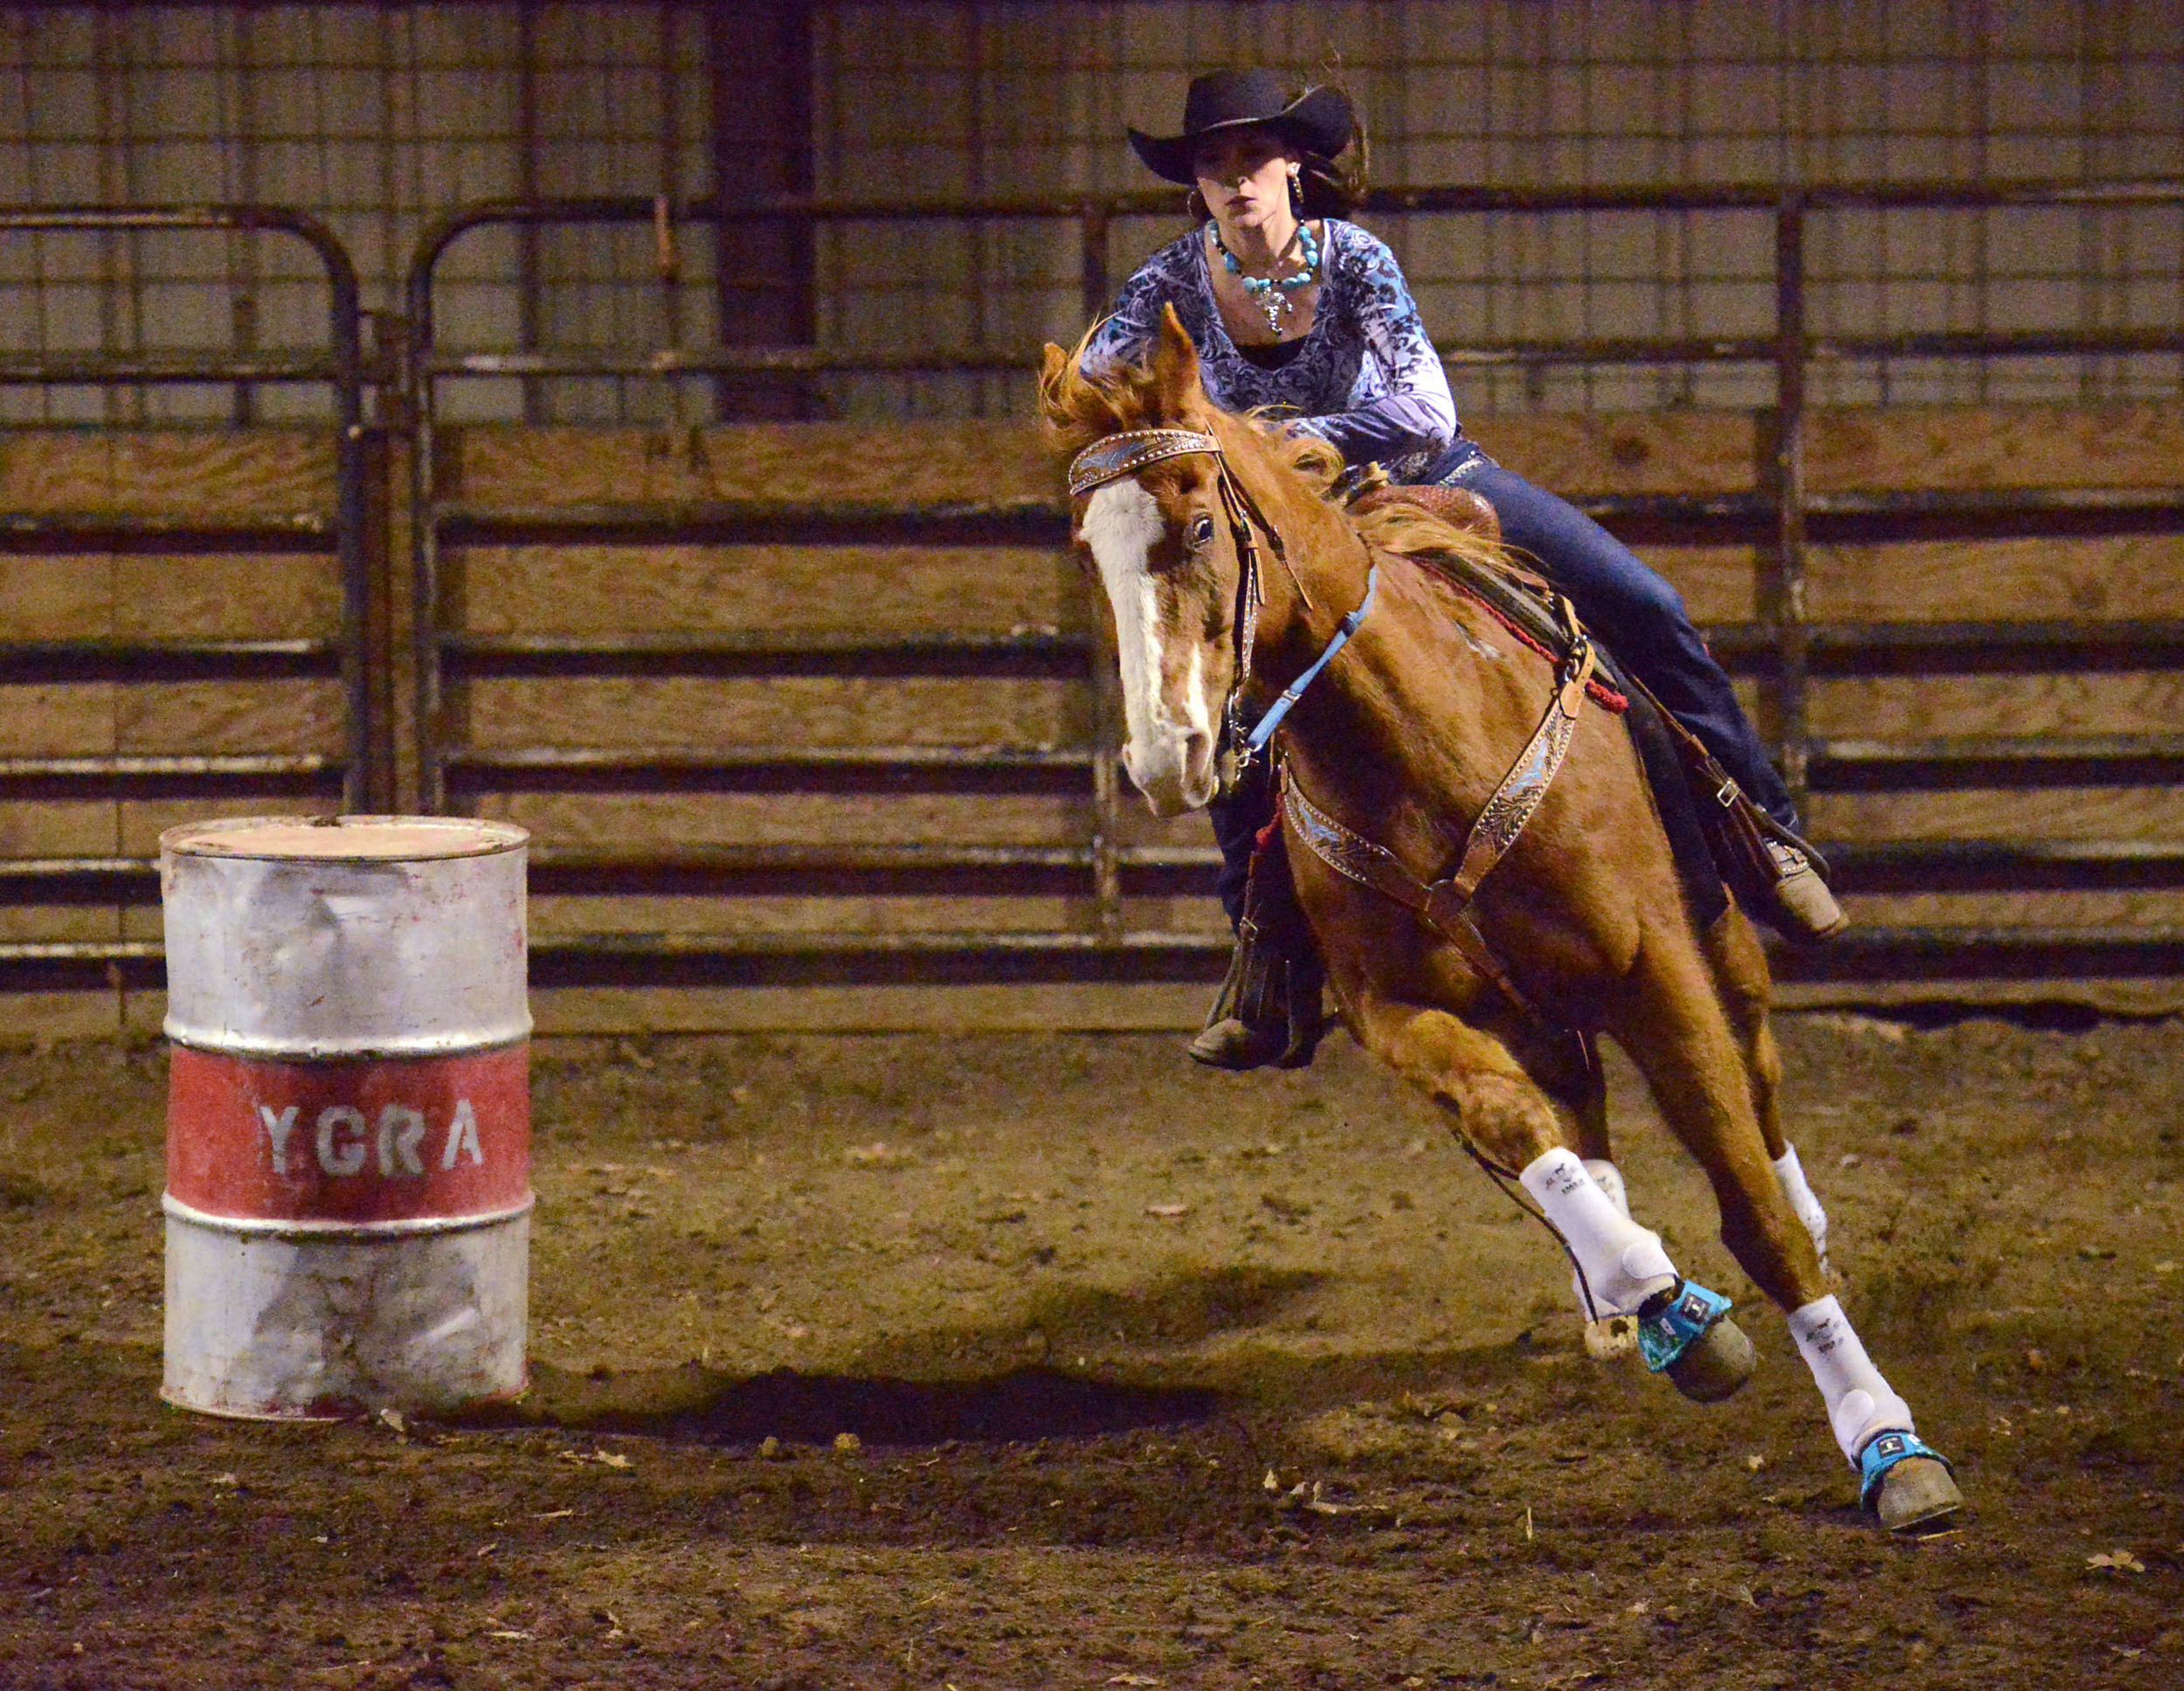   Amee Riley races on her horse Banjo at a rodeo in Eldon, Mo. Amee won first place and a belt buckle at the rodeo for having the most points in her age division. "I don't really have spare time," she says. "I just ride my horses."  